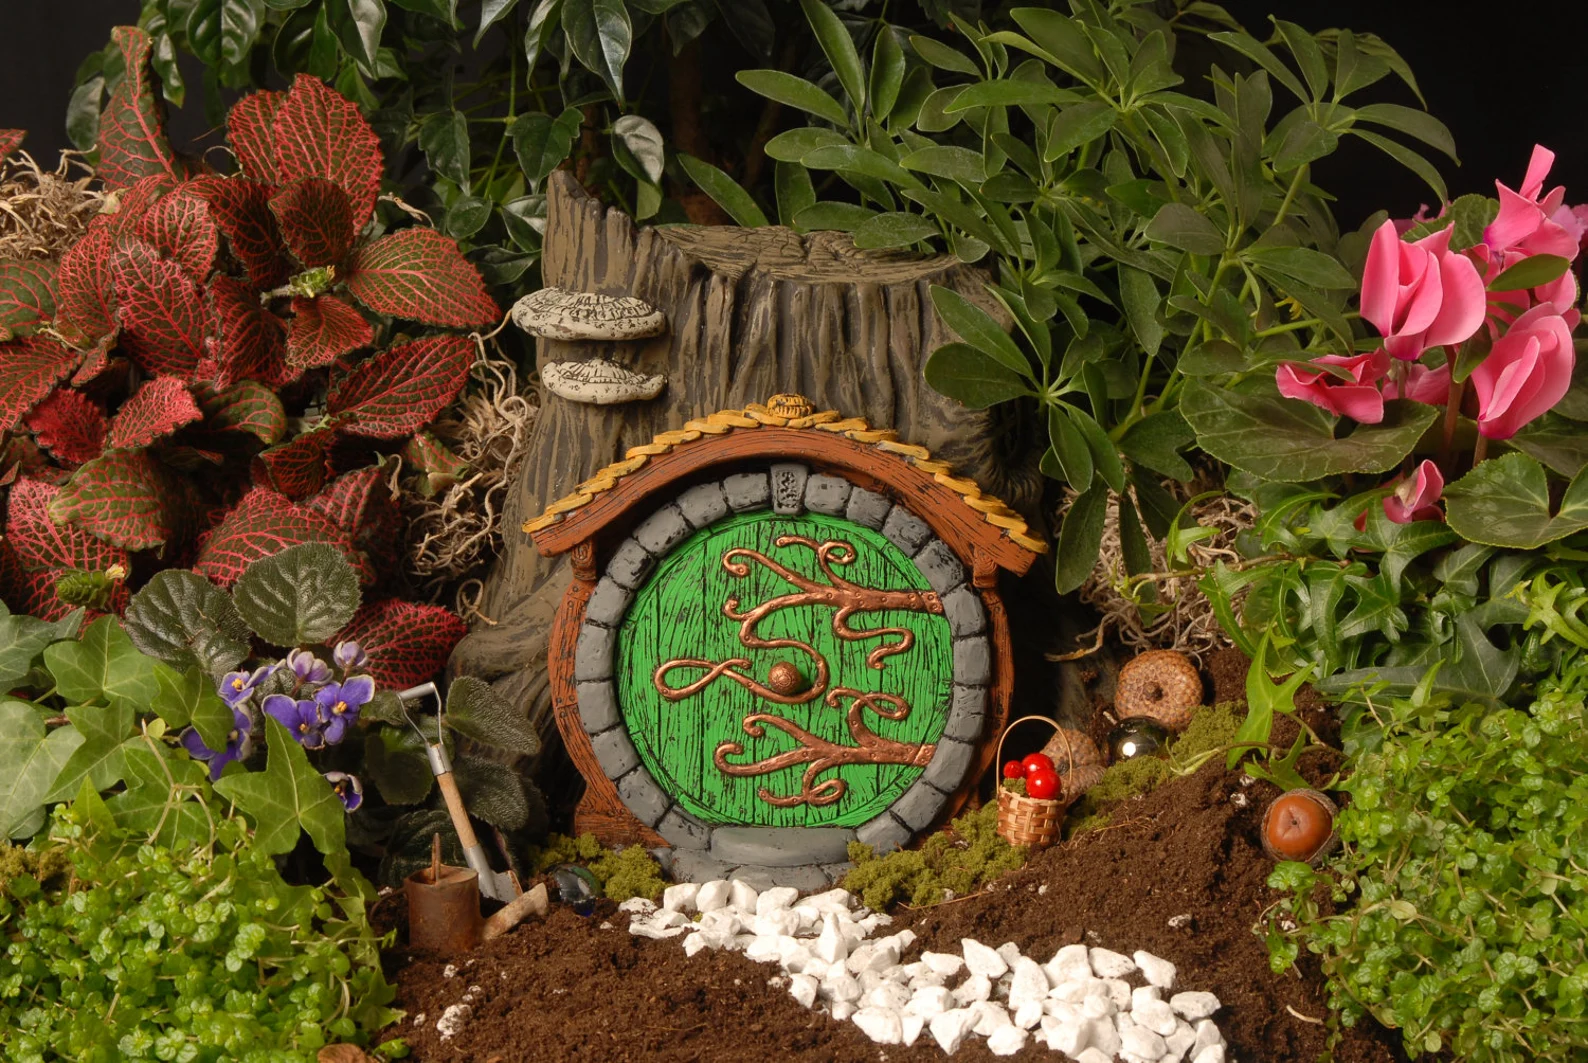 A small round green door is at the base of a small tree stump, surrounded by plants, mini-tools and baskets, and a tiny path made of small stones.